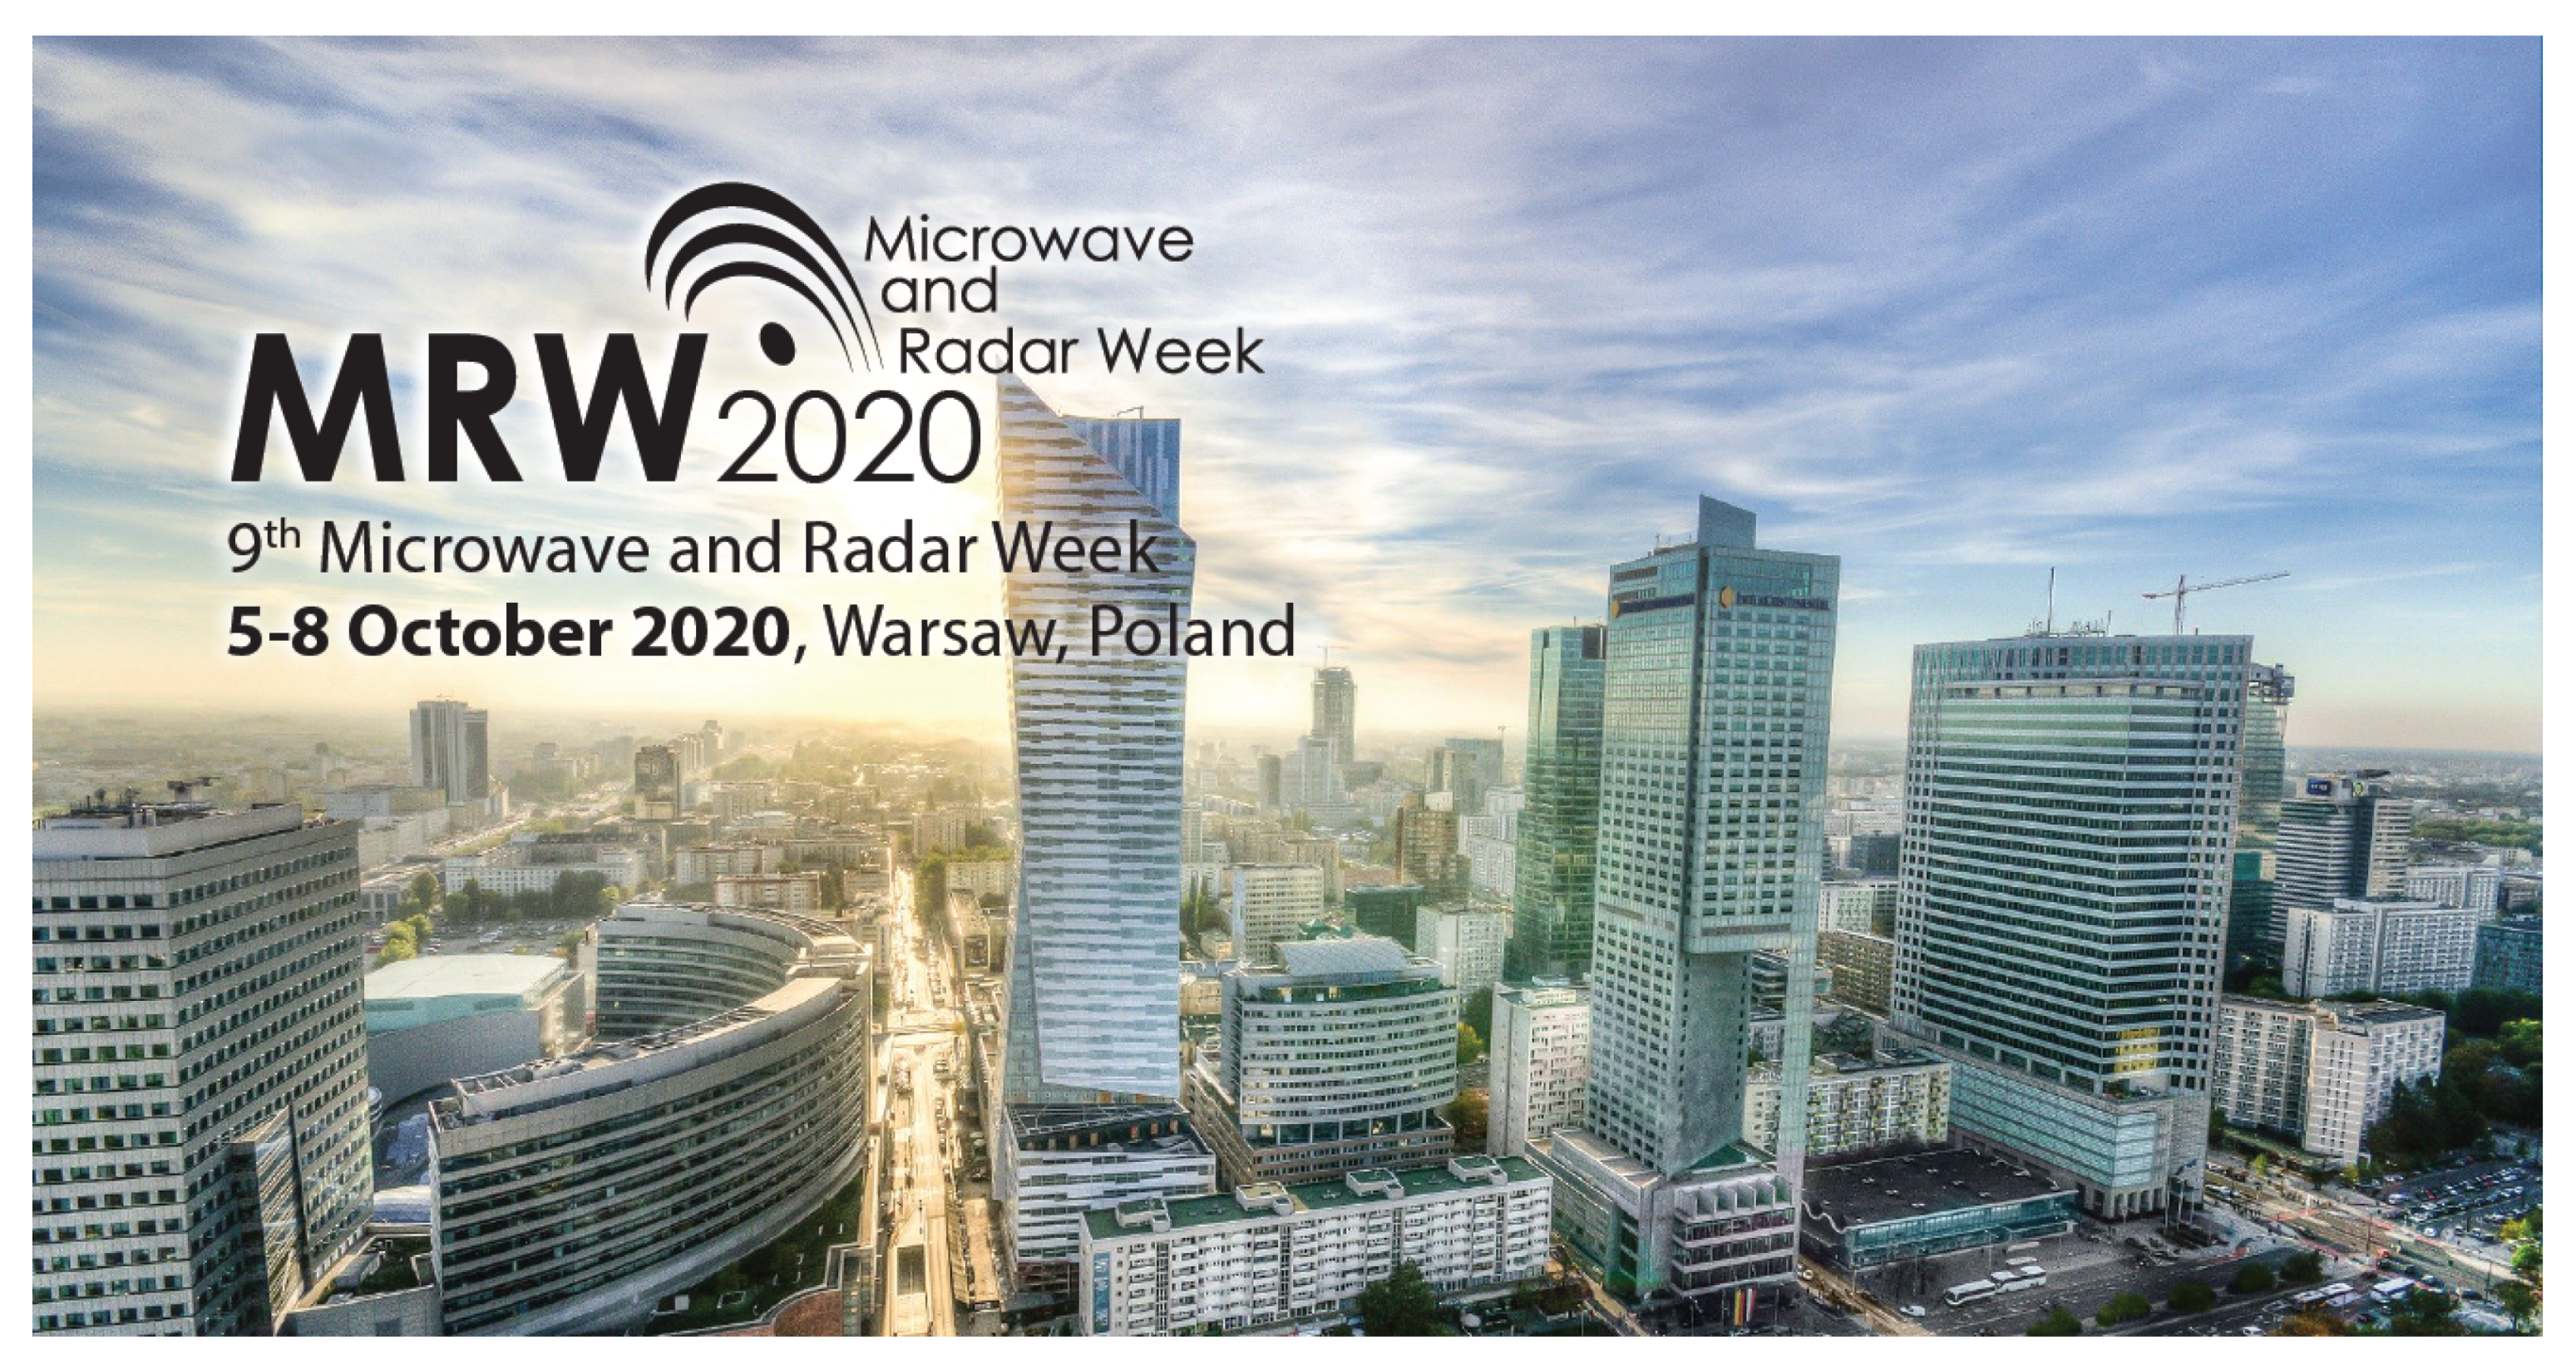 Remote Sensing Free Full Text Microwave And Radar Week Mrw 2020 Selected Papers Html